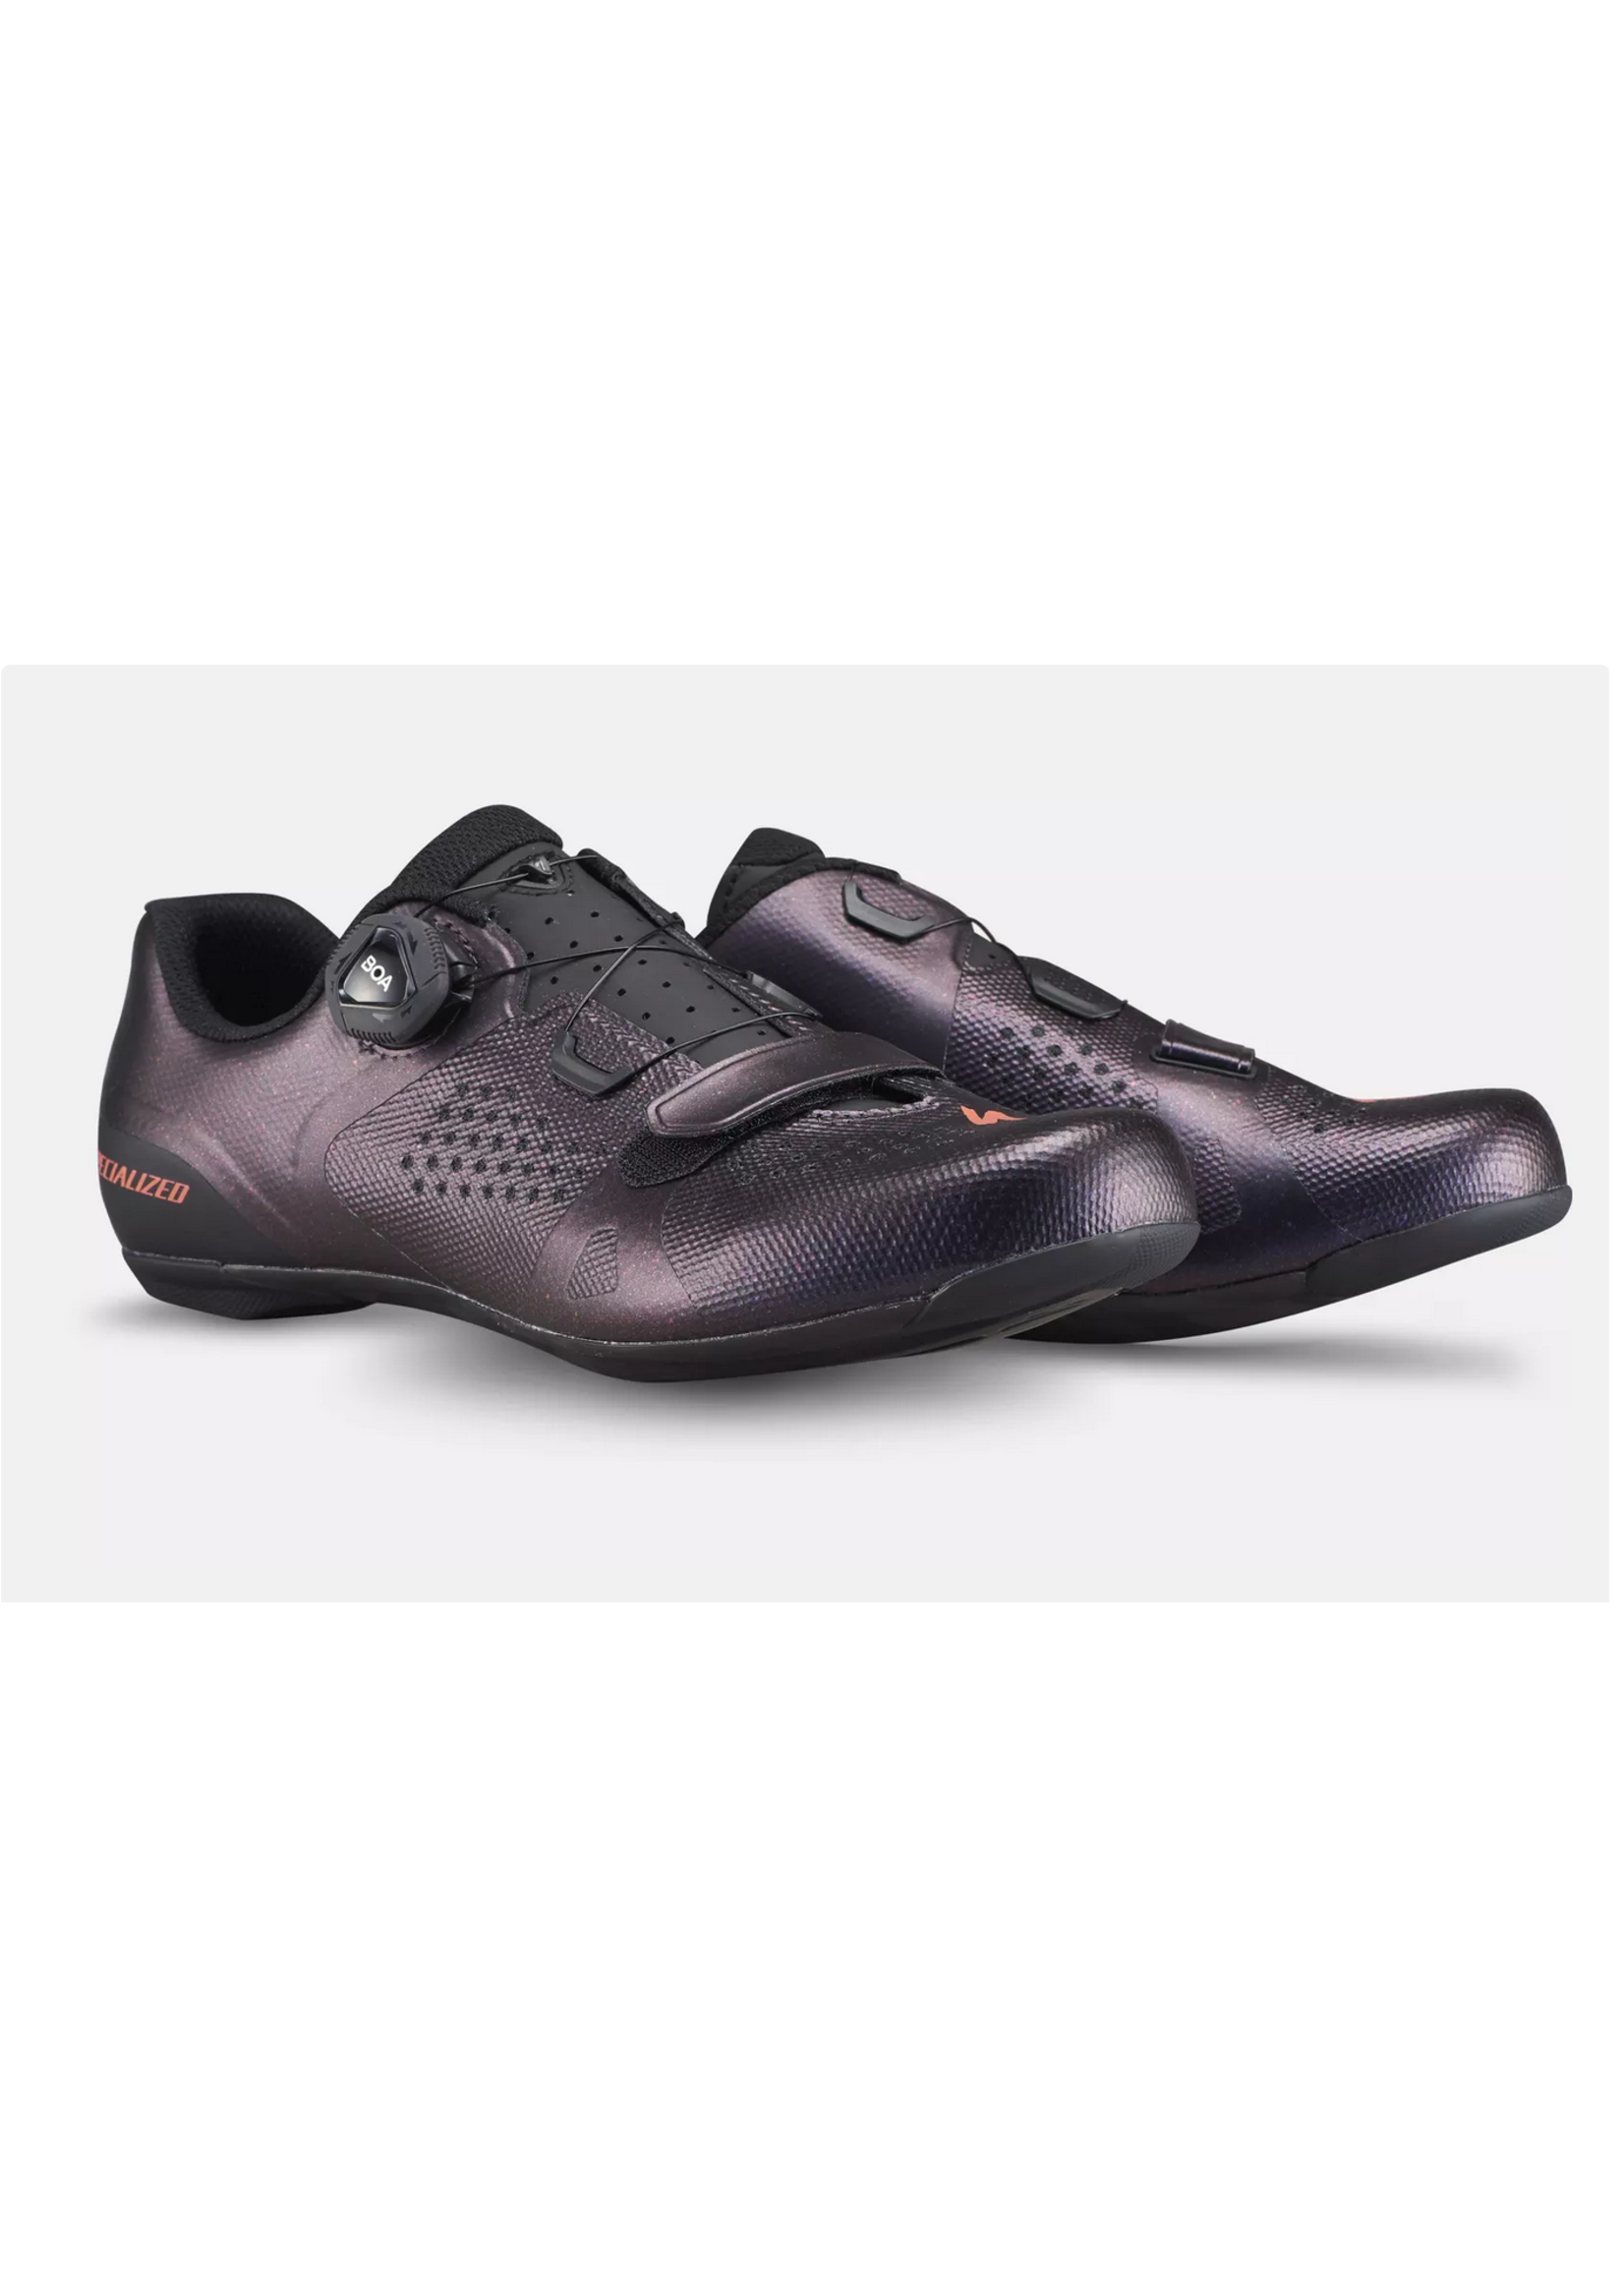 Specialized Torch 2.0 Road Shoes